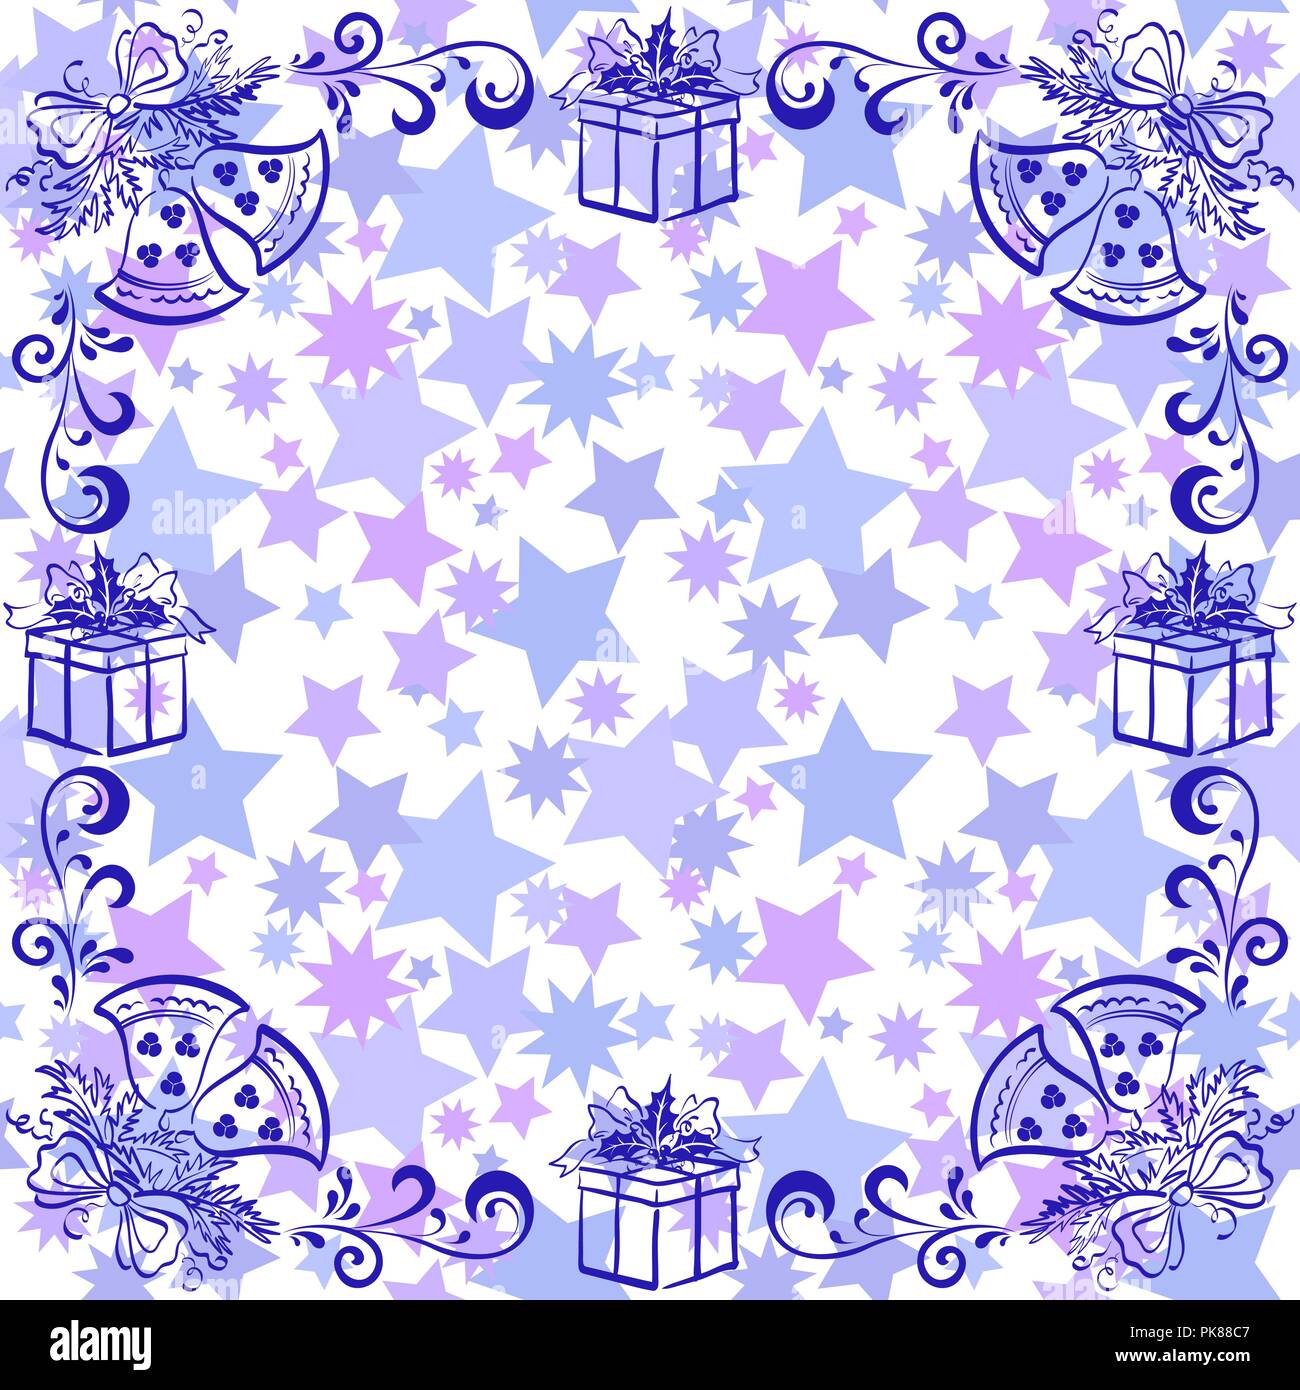 Holiday Christmas background Stock Vector